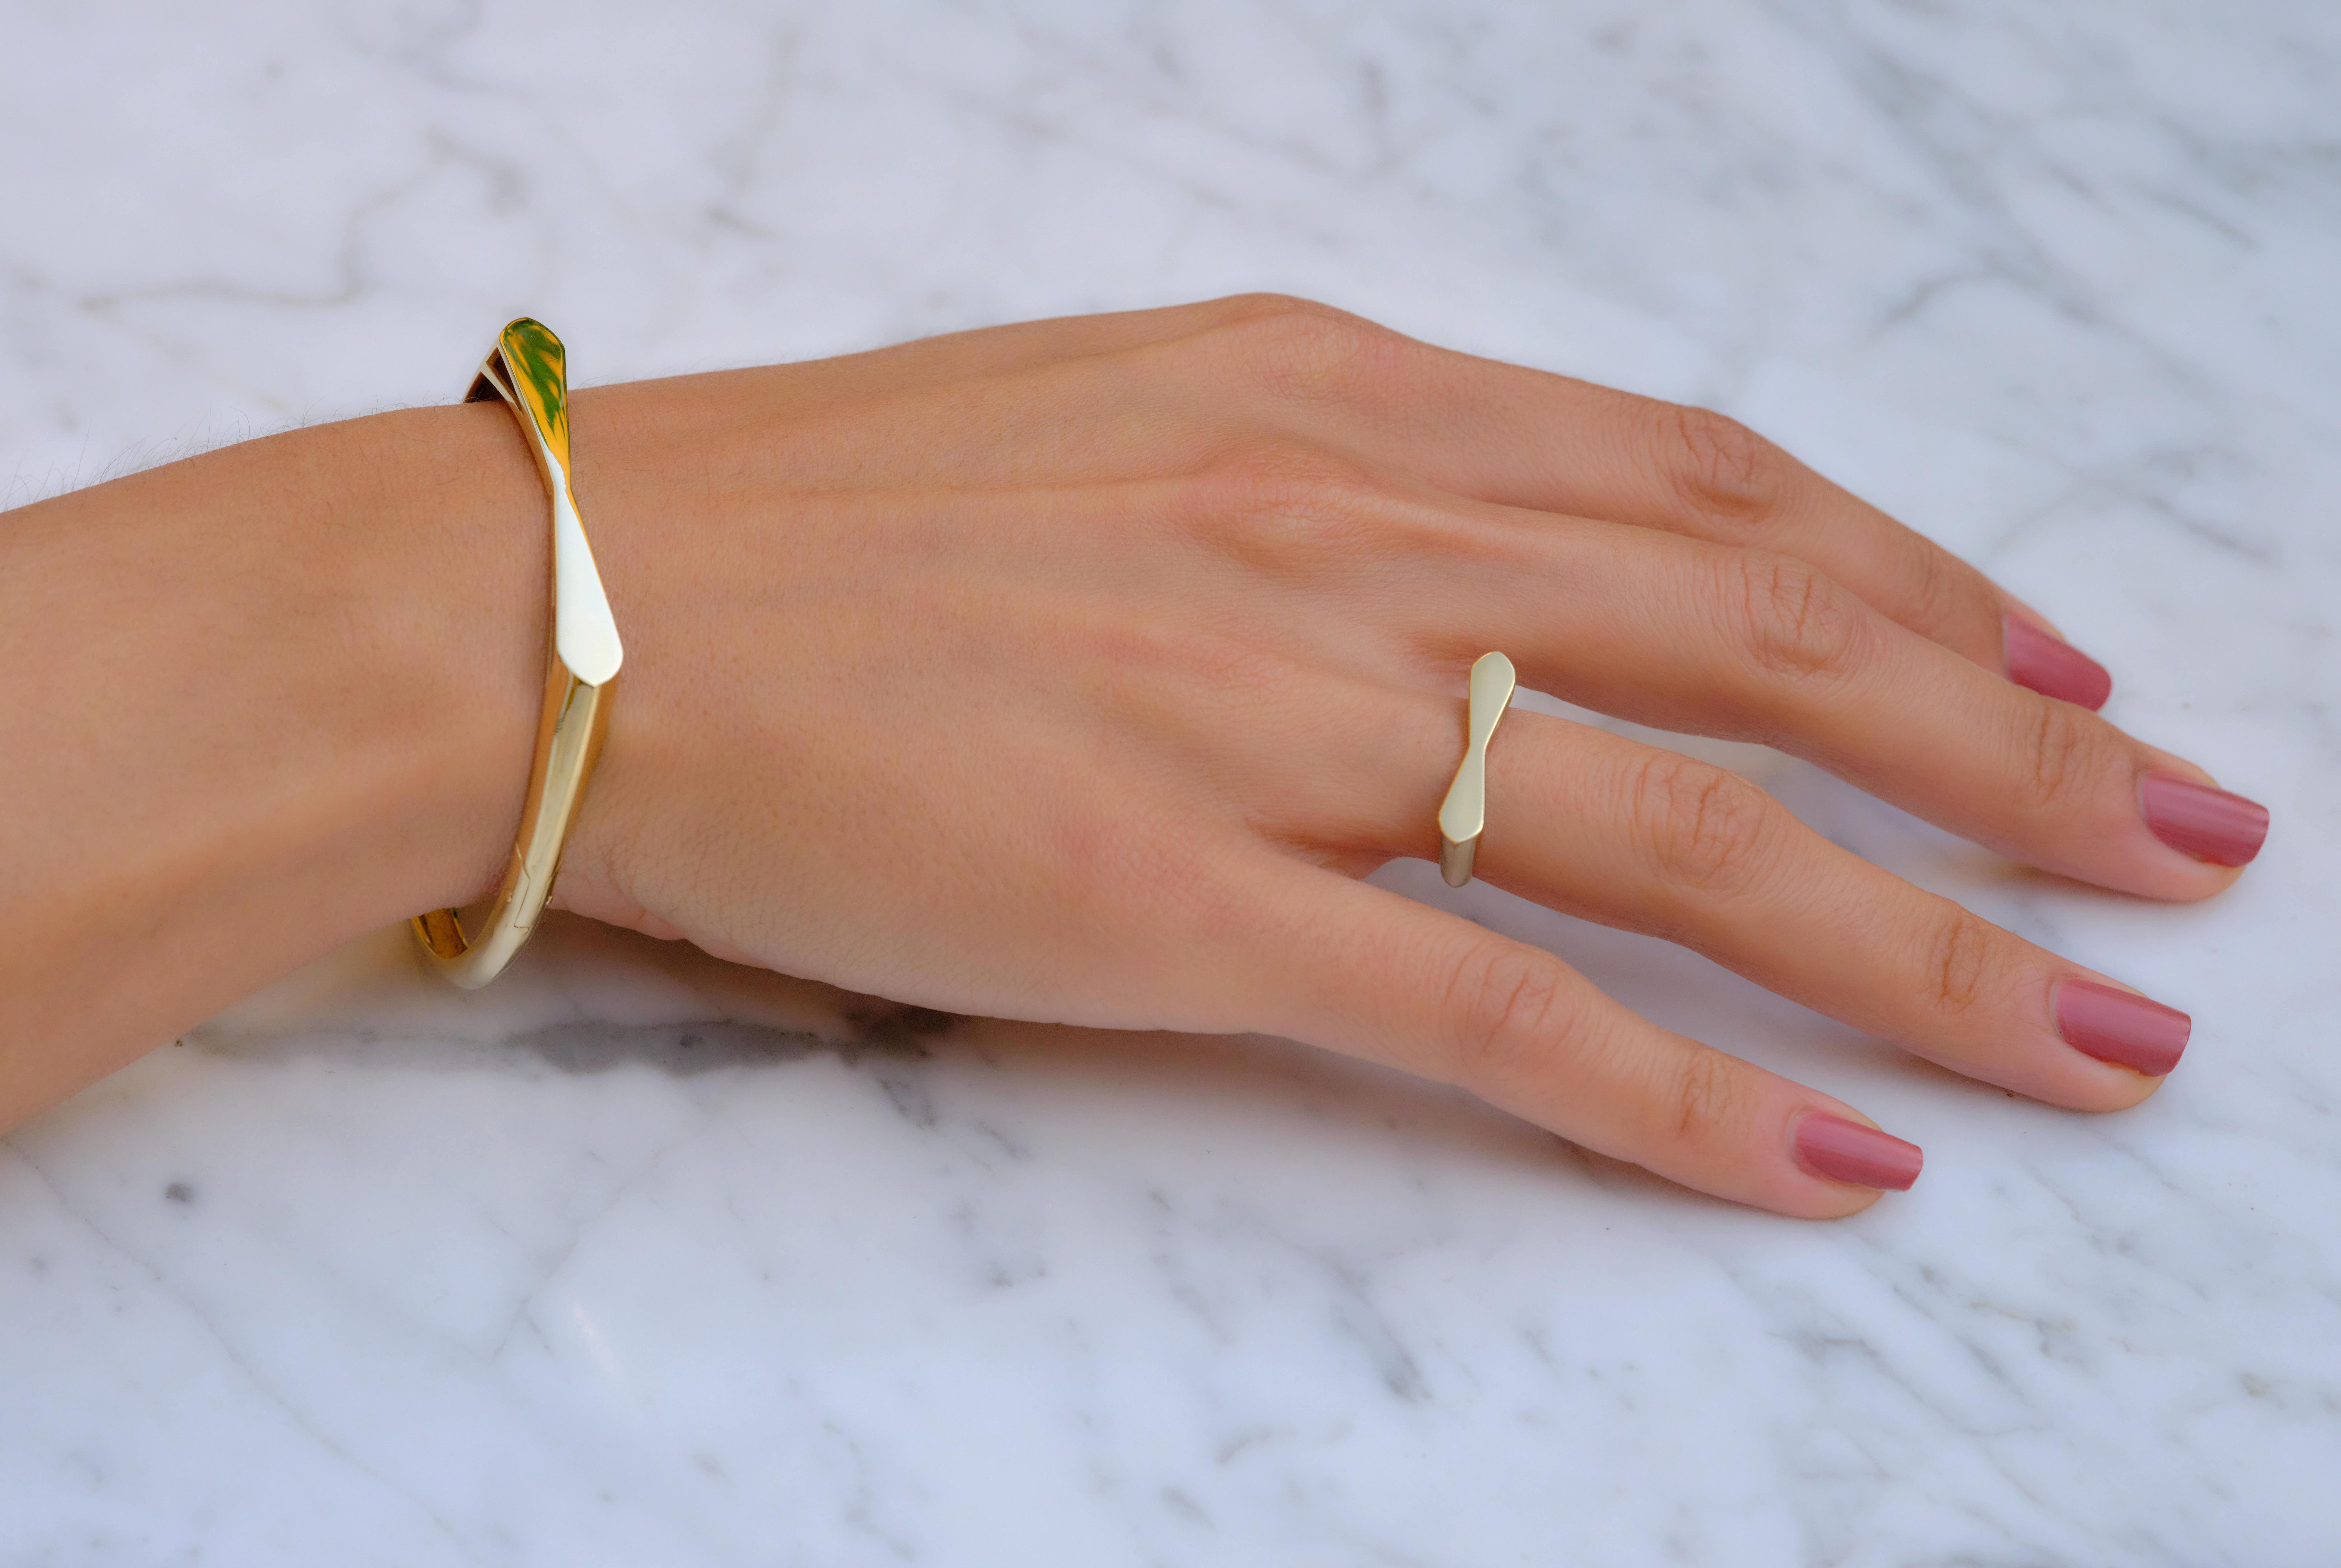 Painstakingly made with 2 closures. Inspired by the figure of a tie, suit yourself!

Available in Yellow Gold, ring in size size 53 (EU) 6,6 (US), 16,8 mm (the size can be altered to fit) and the bracelet in size S (55 mm)

•	18 Karat Recycled